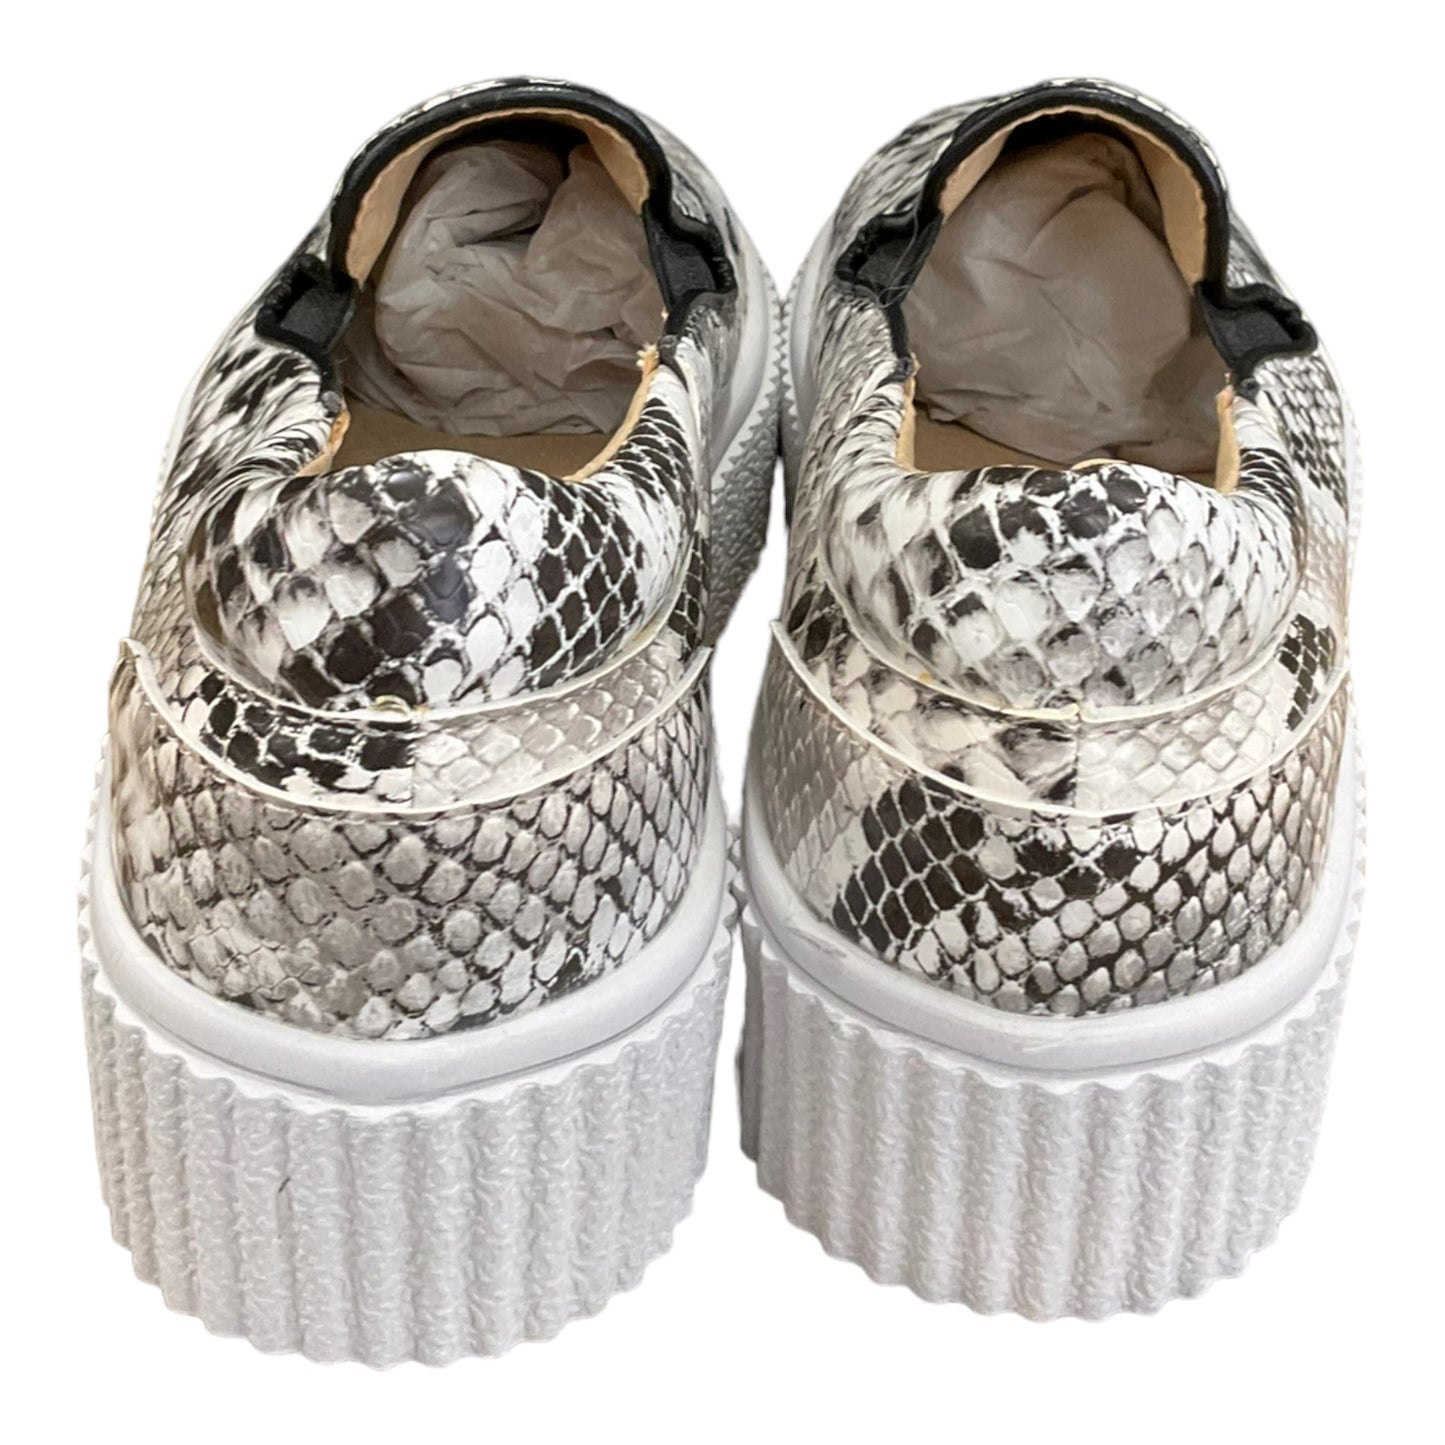 Shoes Sneakers By Clothes Mentor  Size: 5.5